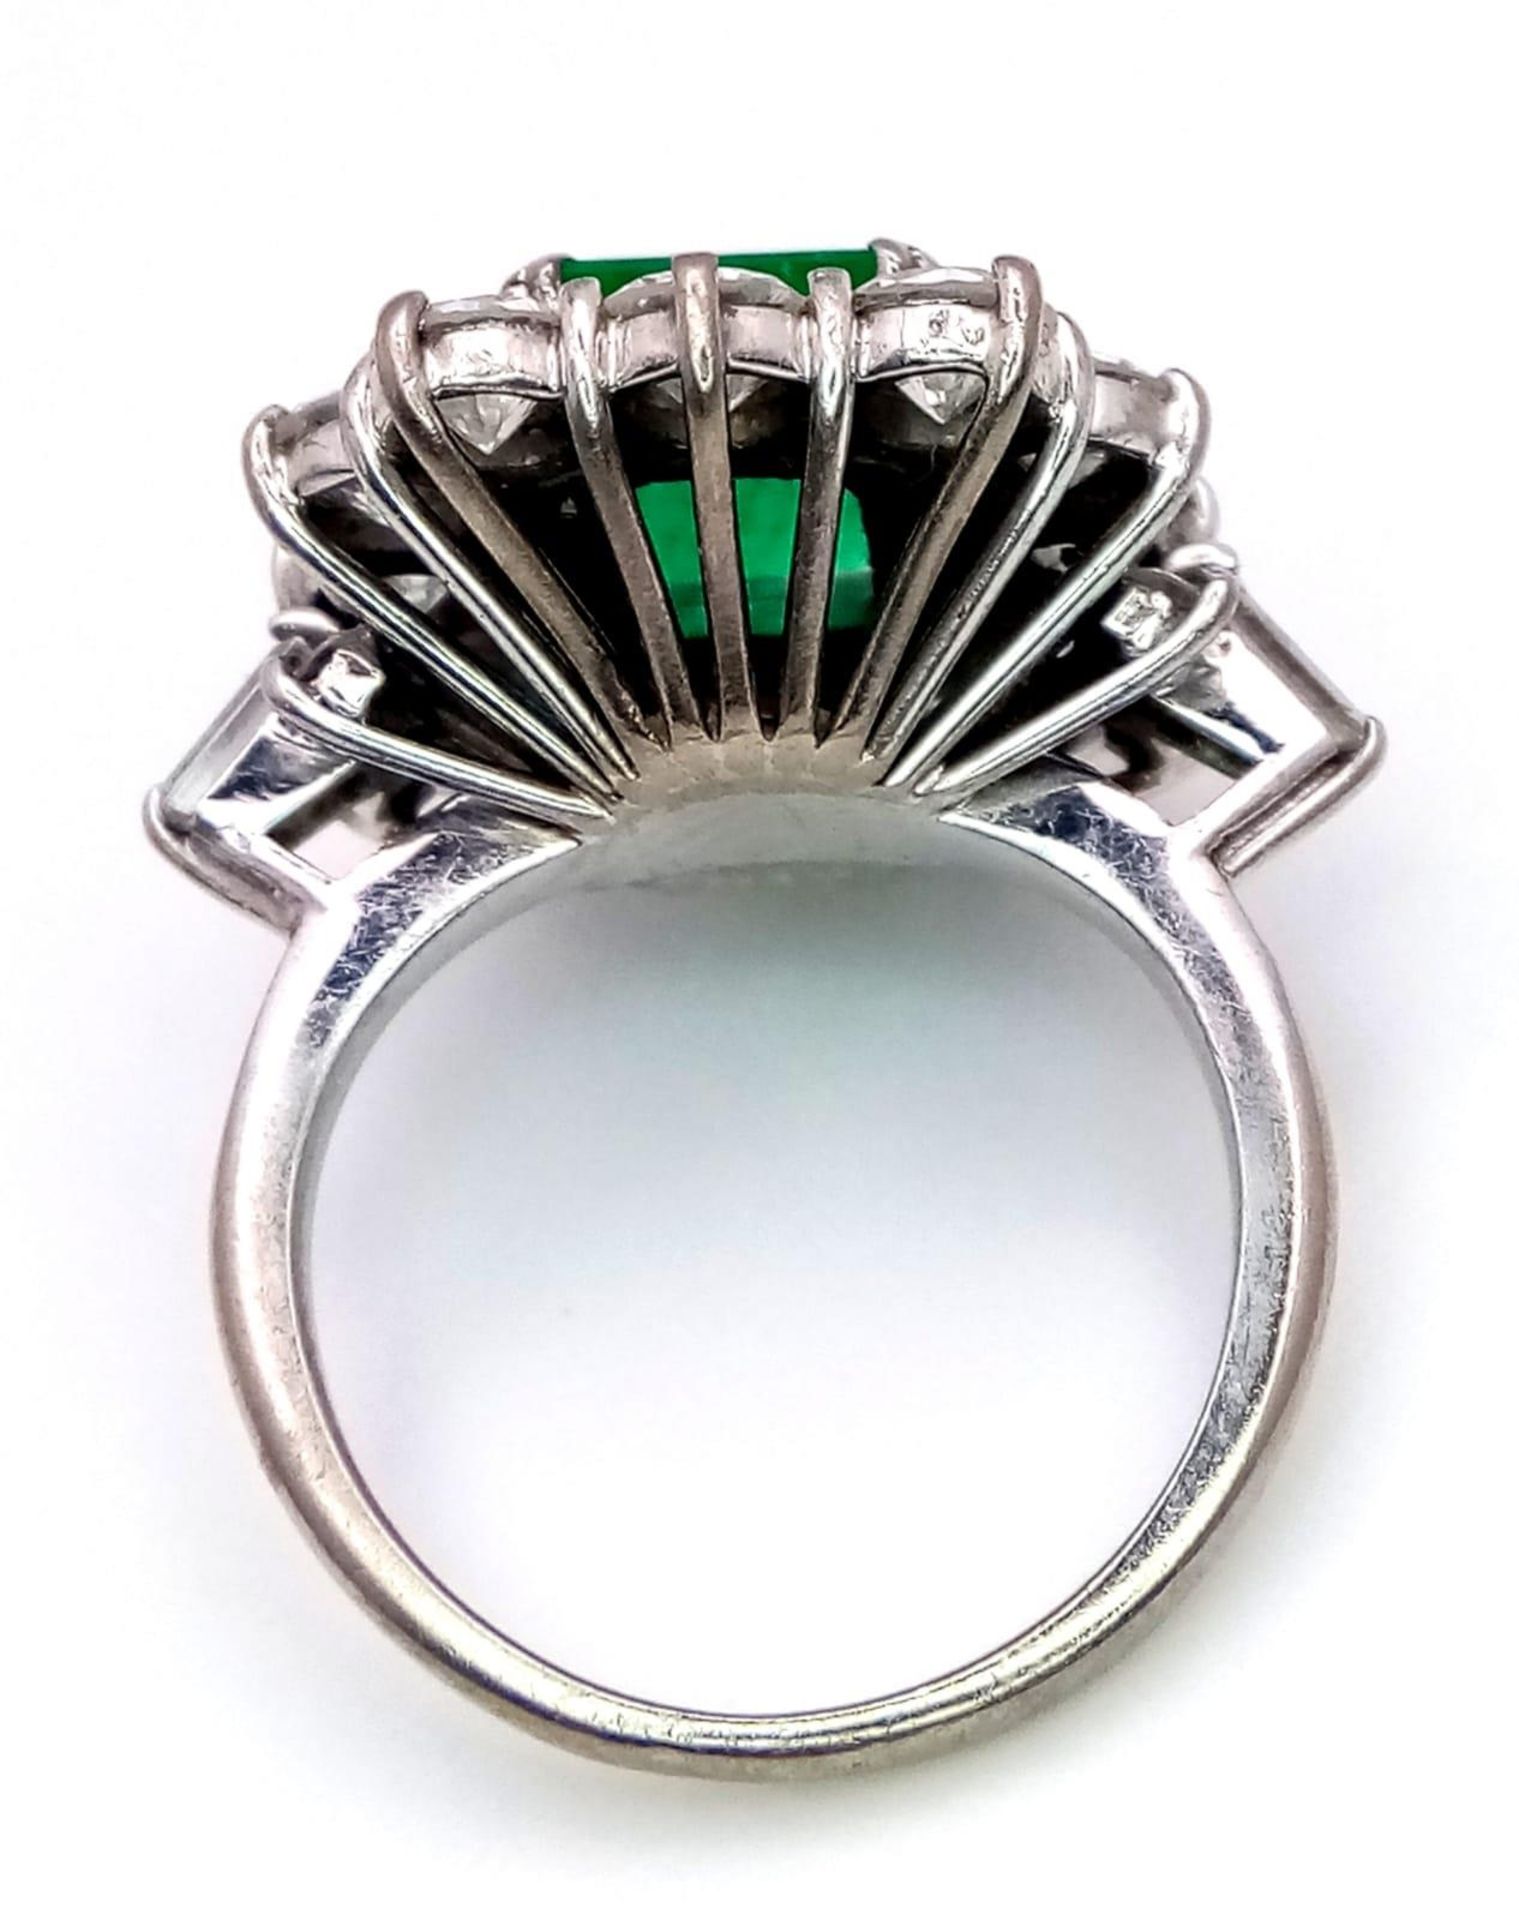 A Head-Turning 18K White Gold, Emerald and Diamond Ladies Dress Ring. Rectangular emerald with a - Image 6 of 7